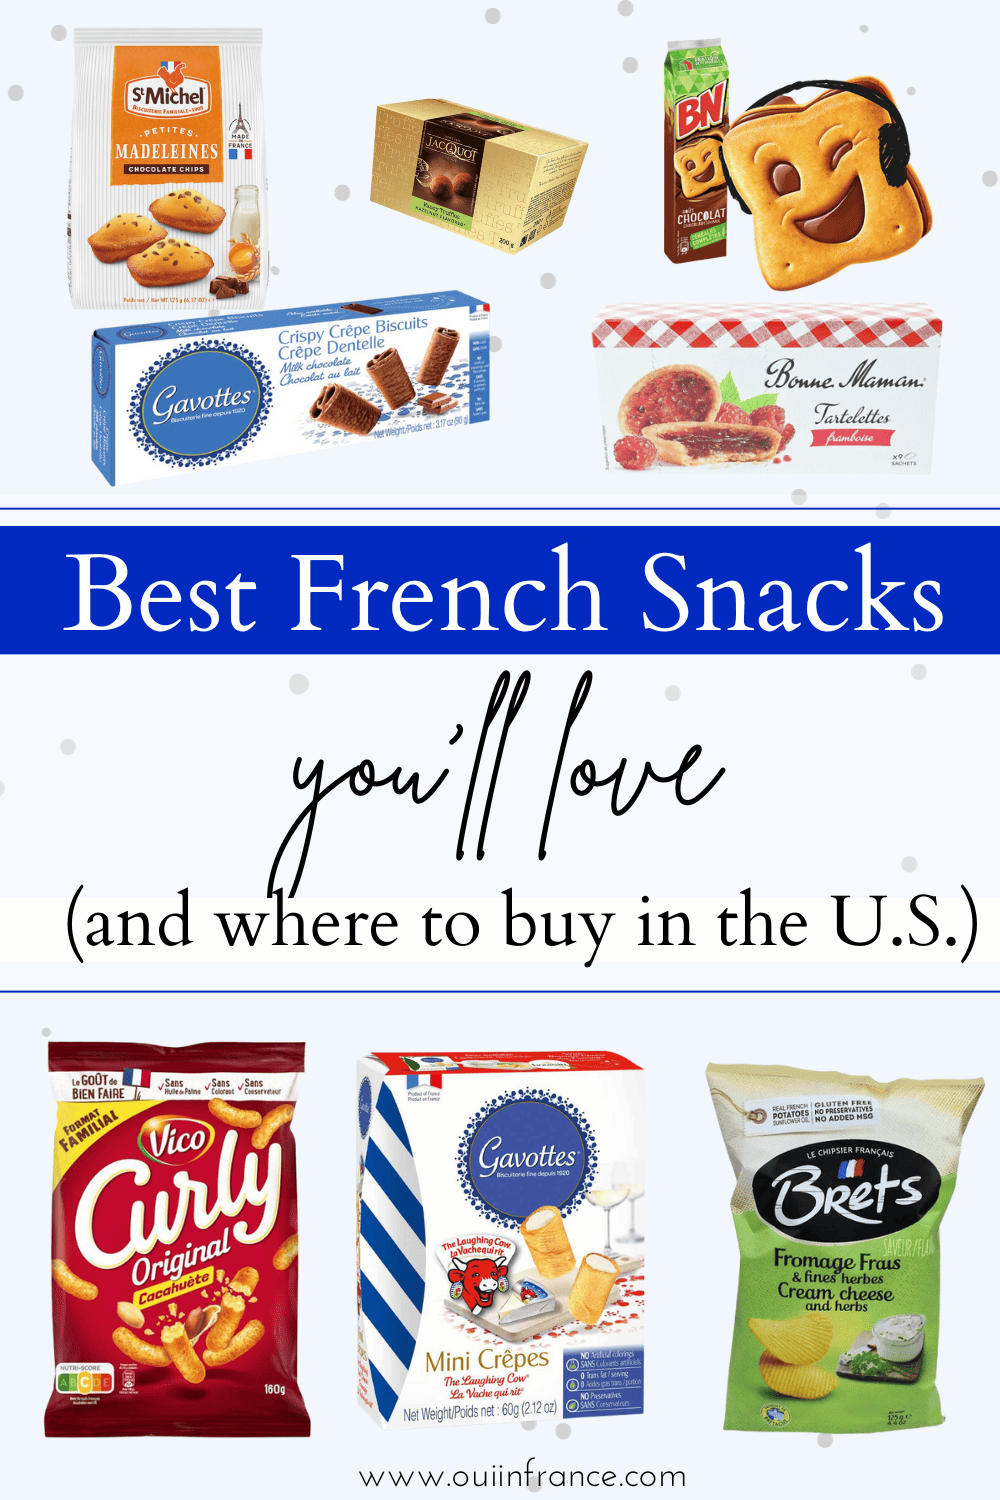 French snacks where to buy in US supermarket